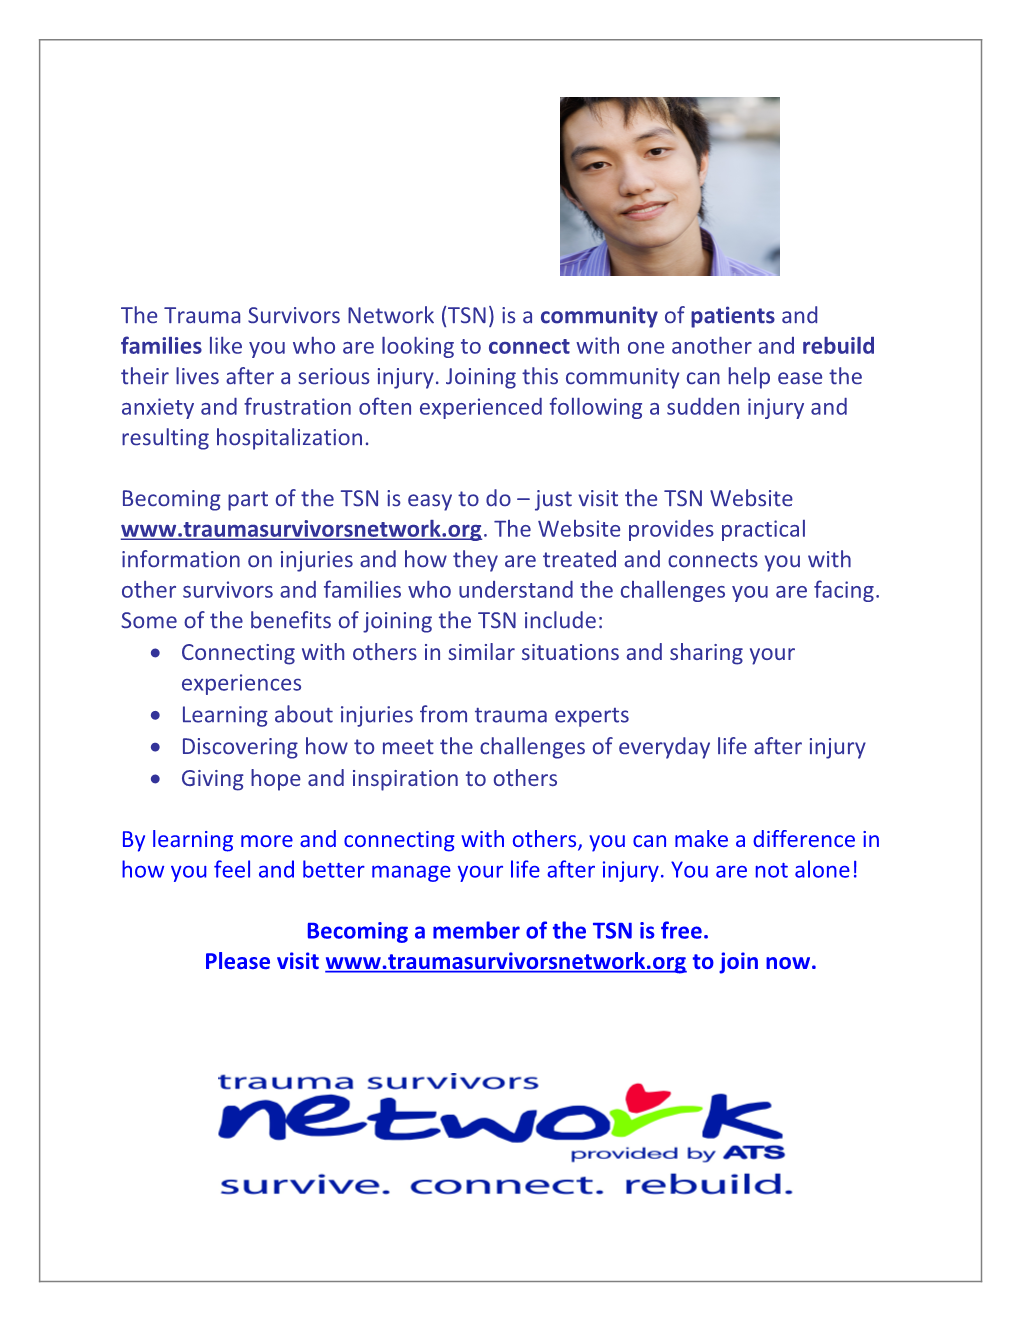 The Trauma Survivors Network (TSN) Is a Community of Patients and Families Like You Who